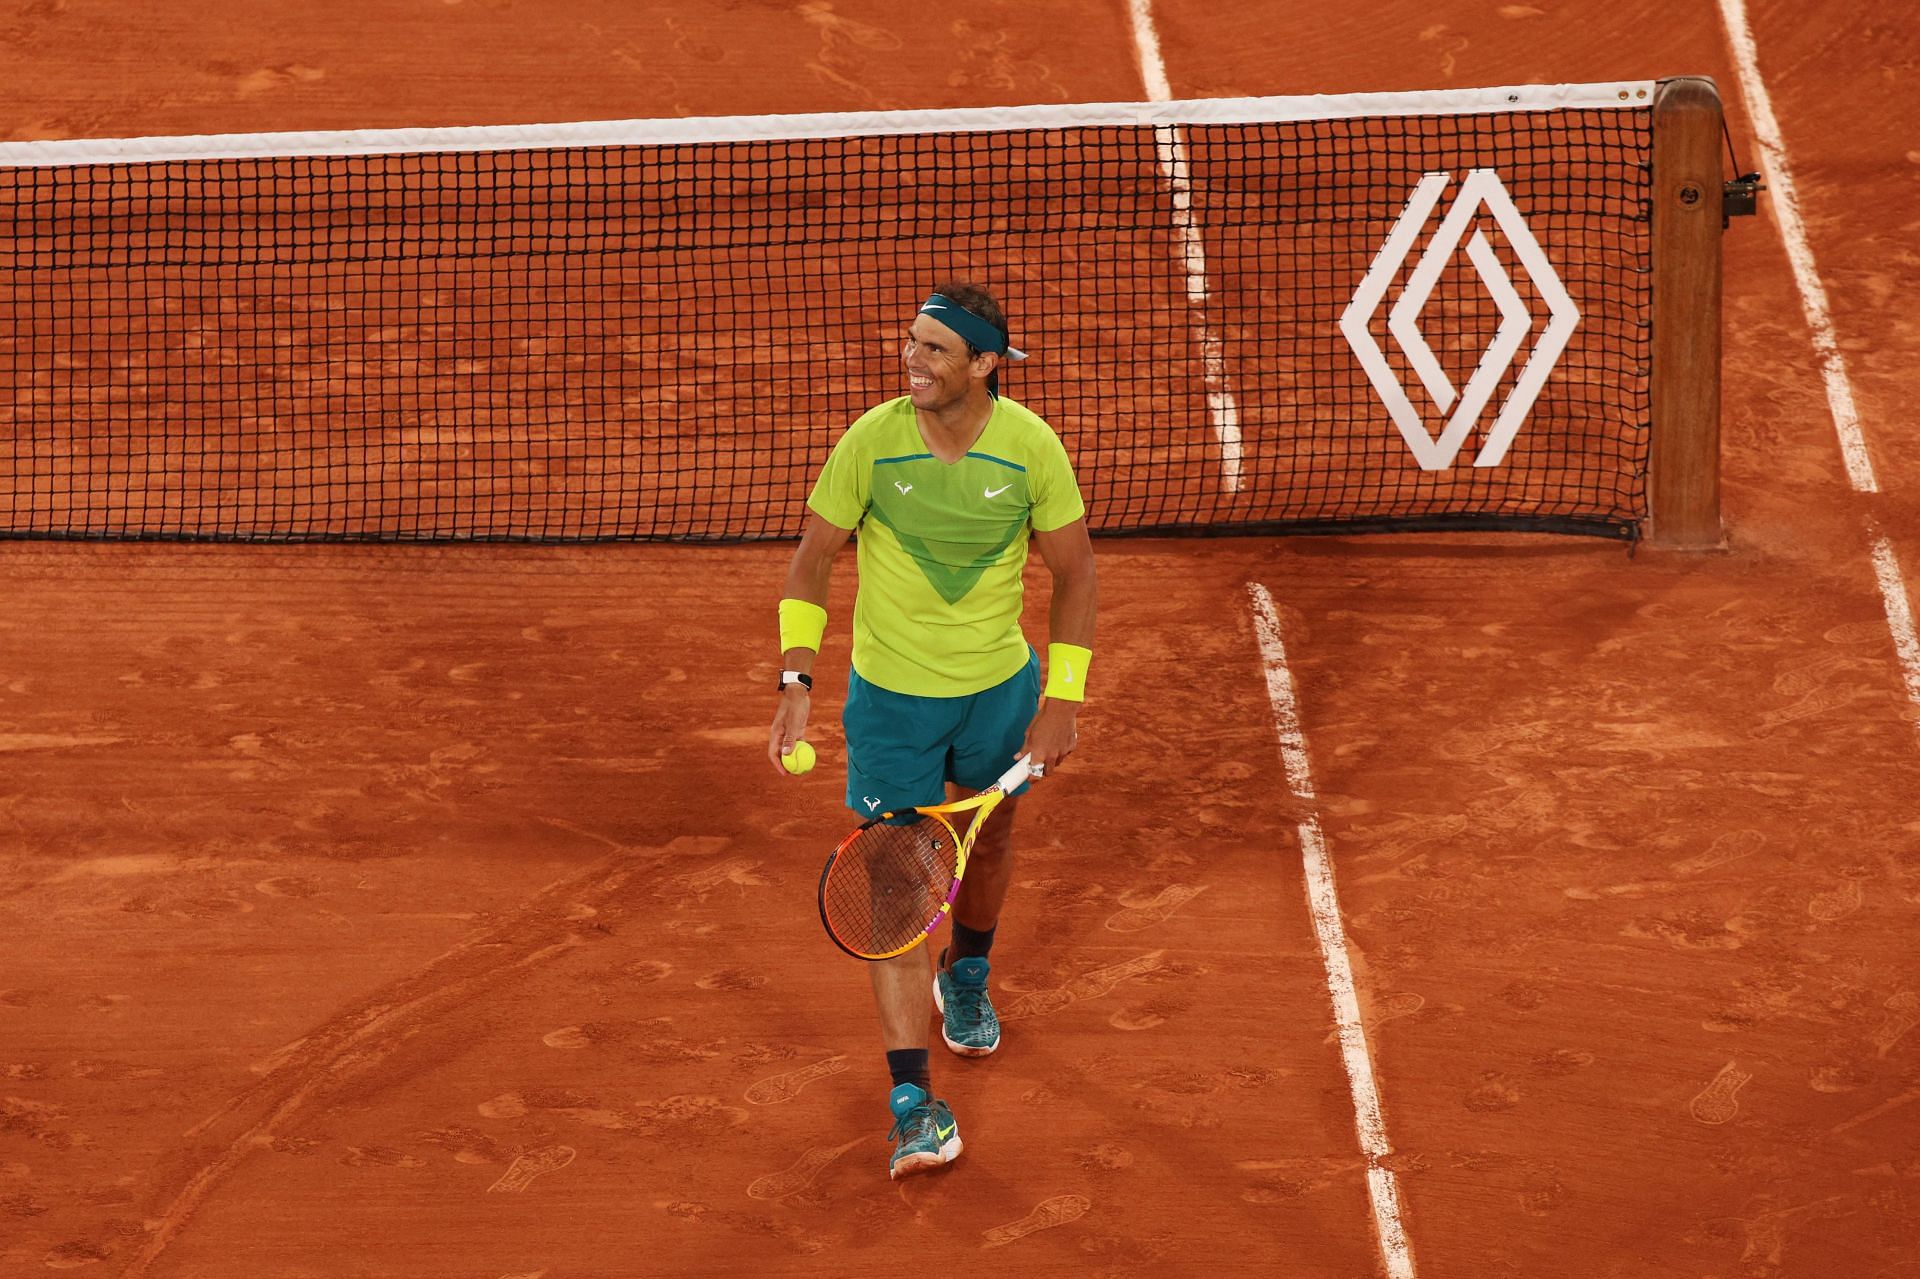 Rafael Nadal takes on Alexander Zverev in the 2022 French Open semifinals.